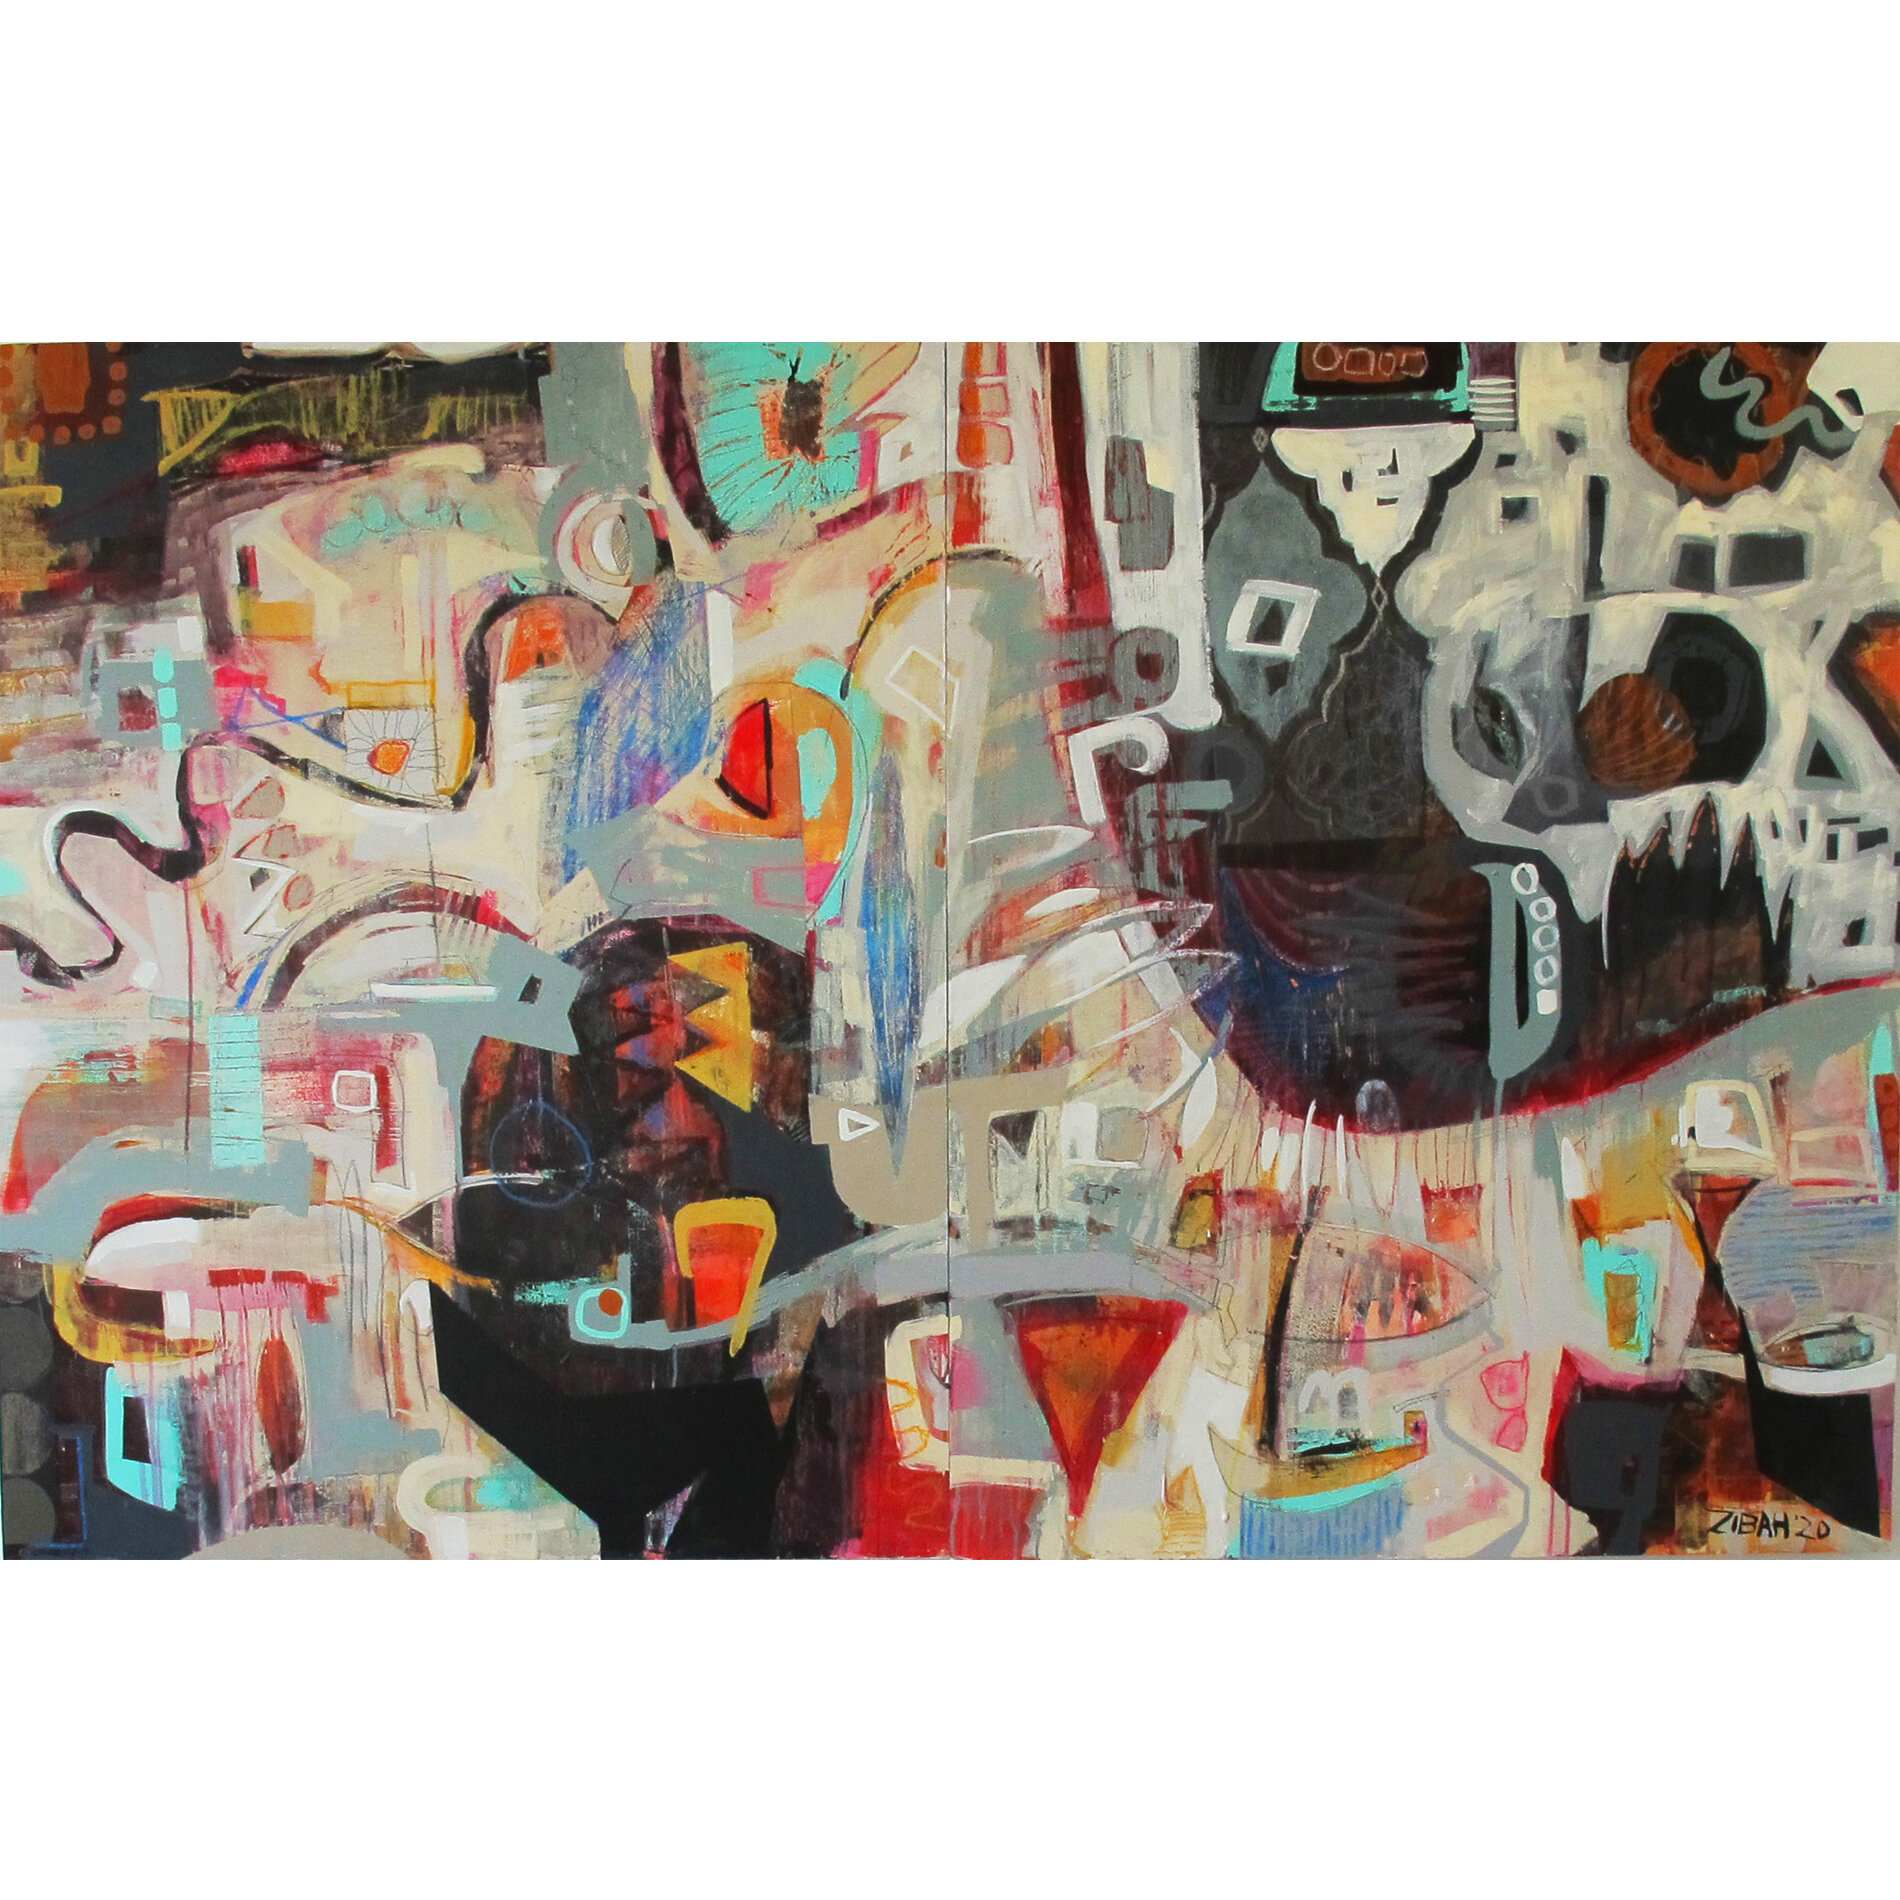 'The Festival' diptych 210cm x 120cm, acrylic, collage, crayon, graphite on panel $4800.jpg